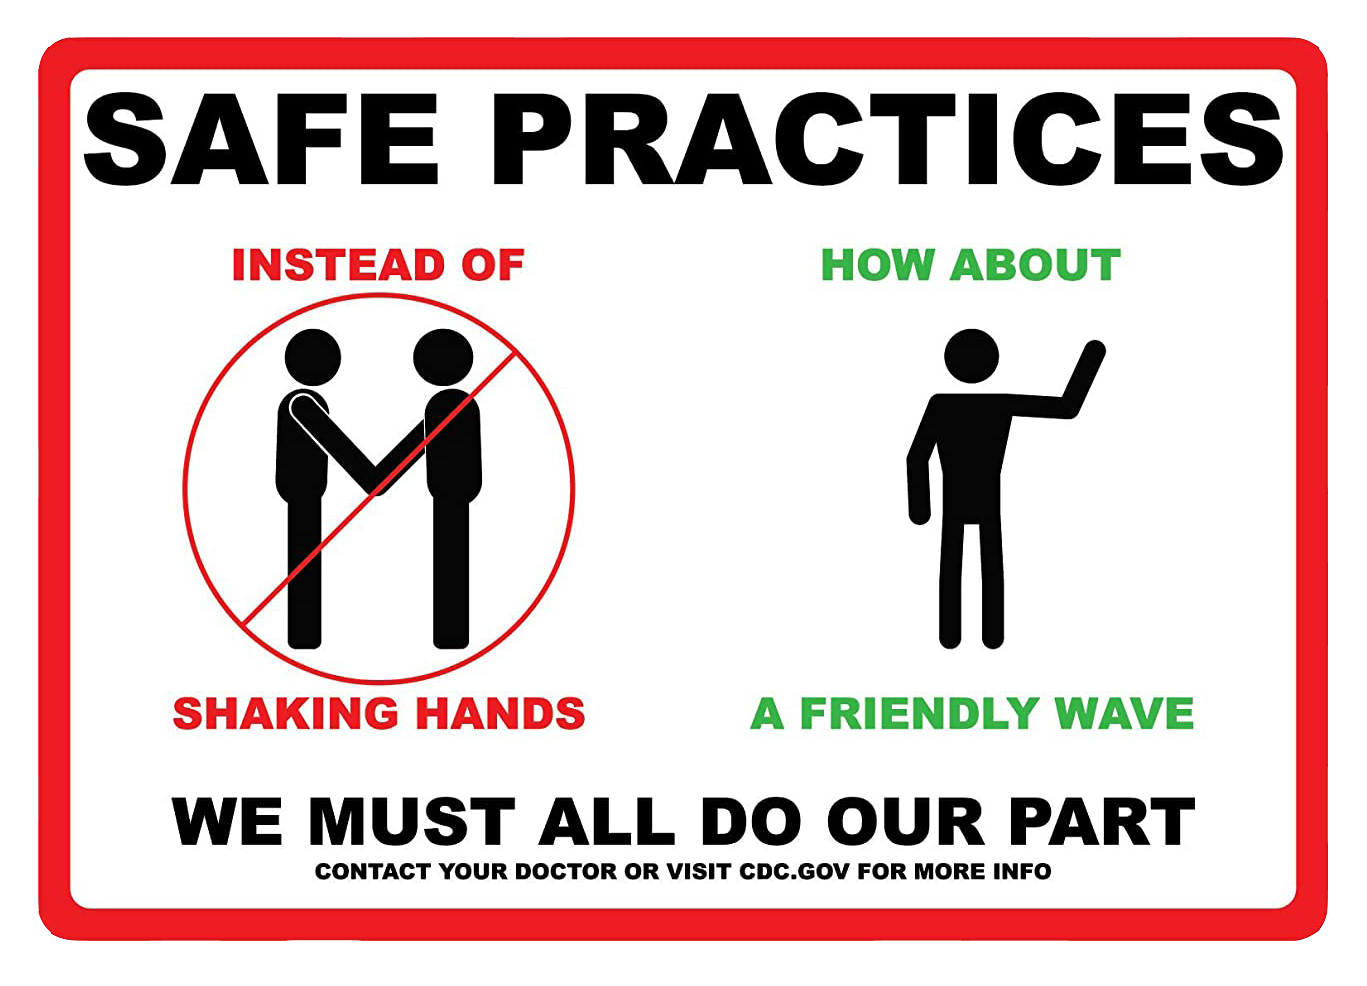 "Safe Practices, Do Our Part" Adhesive Durable Vinyl Decal- 10x7"